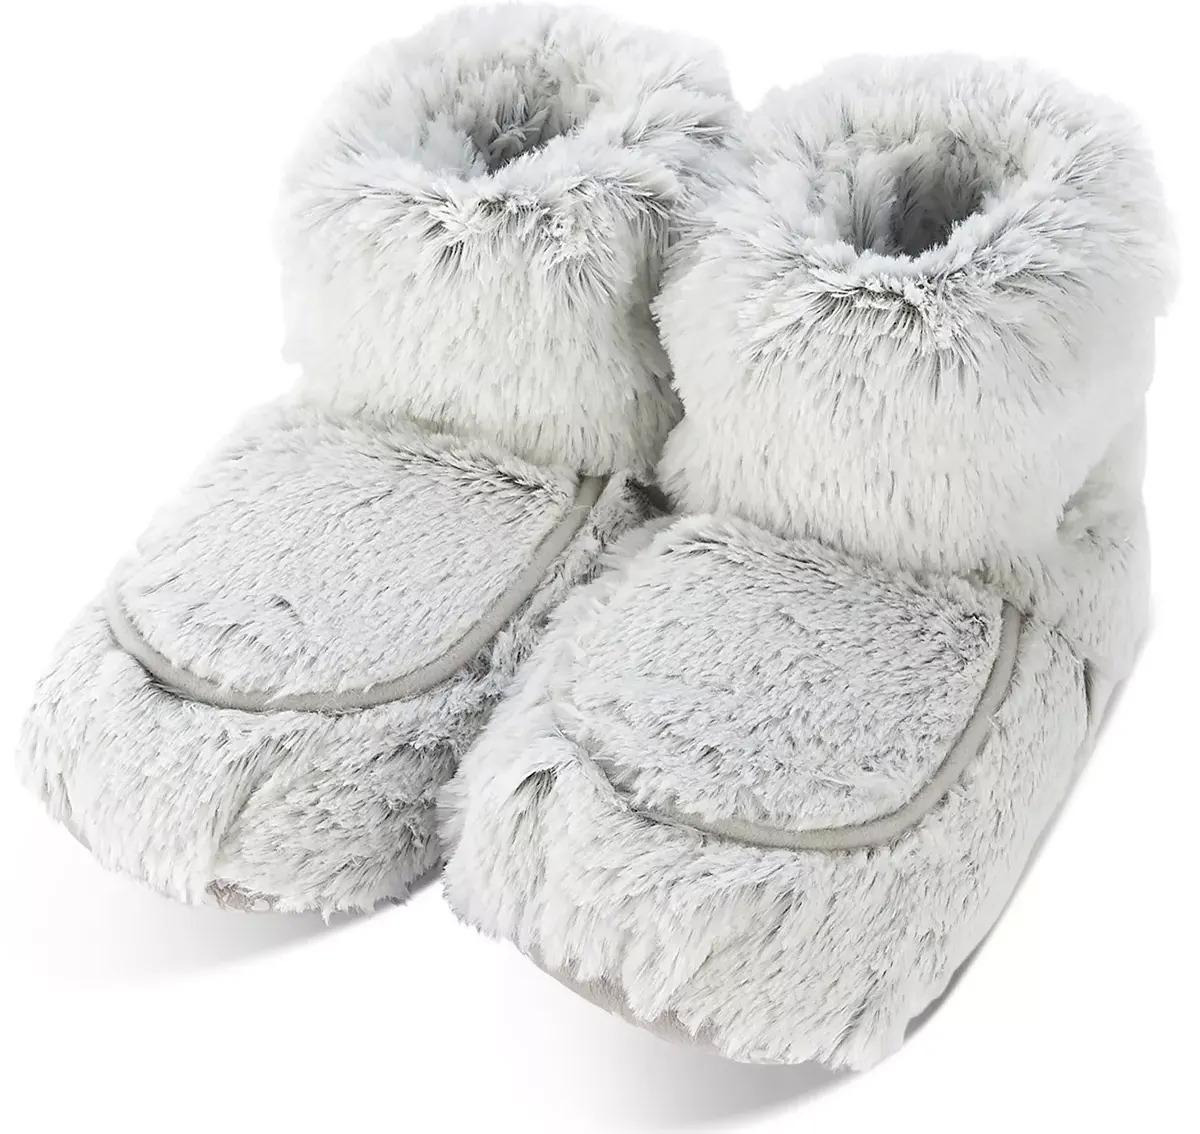 Warmies Womens Marshmallow Boots for $8.73